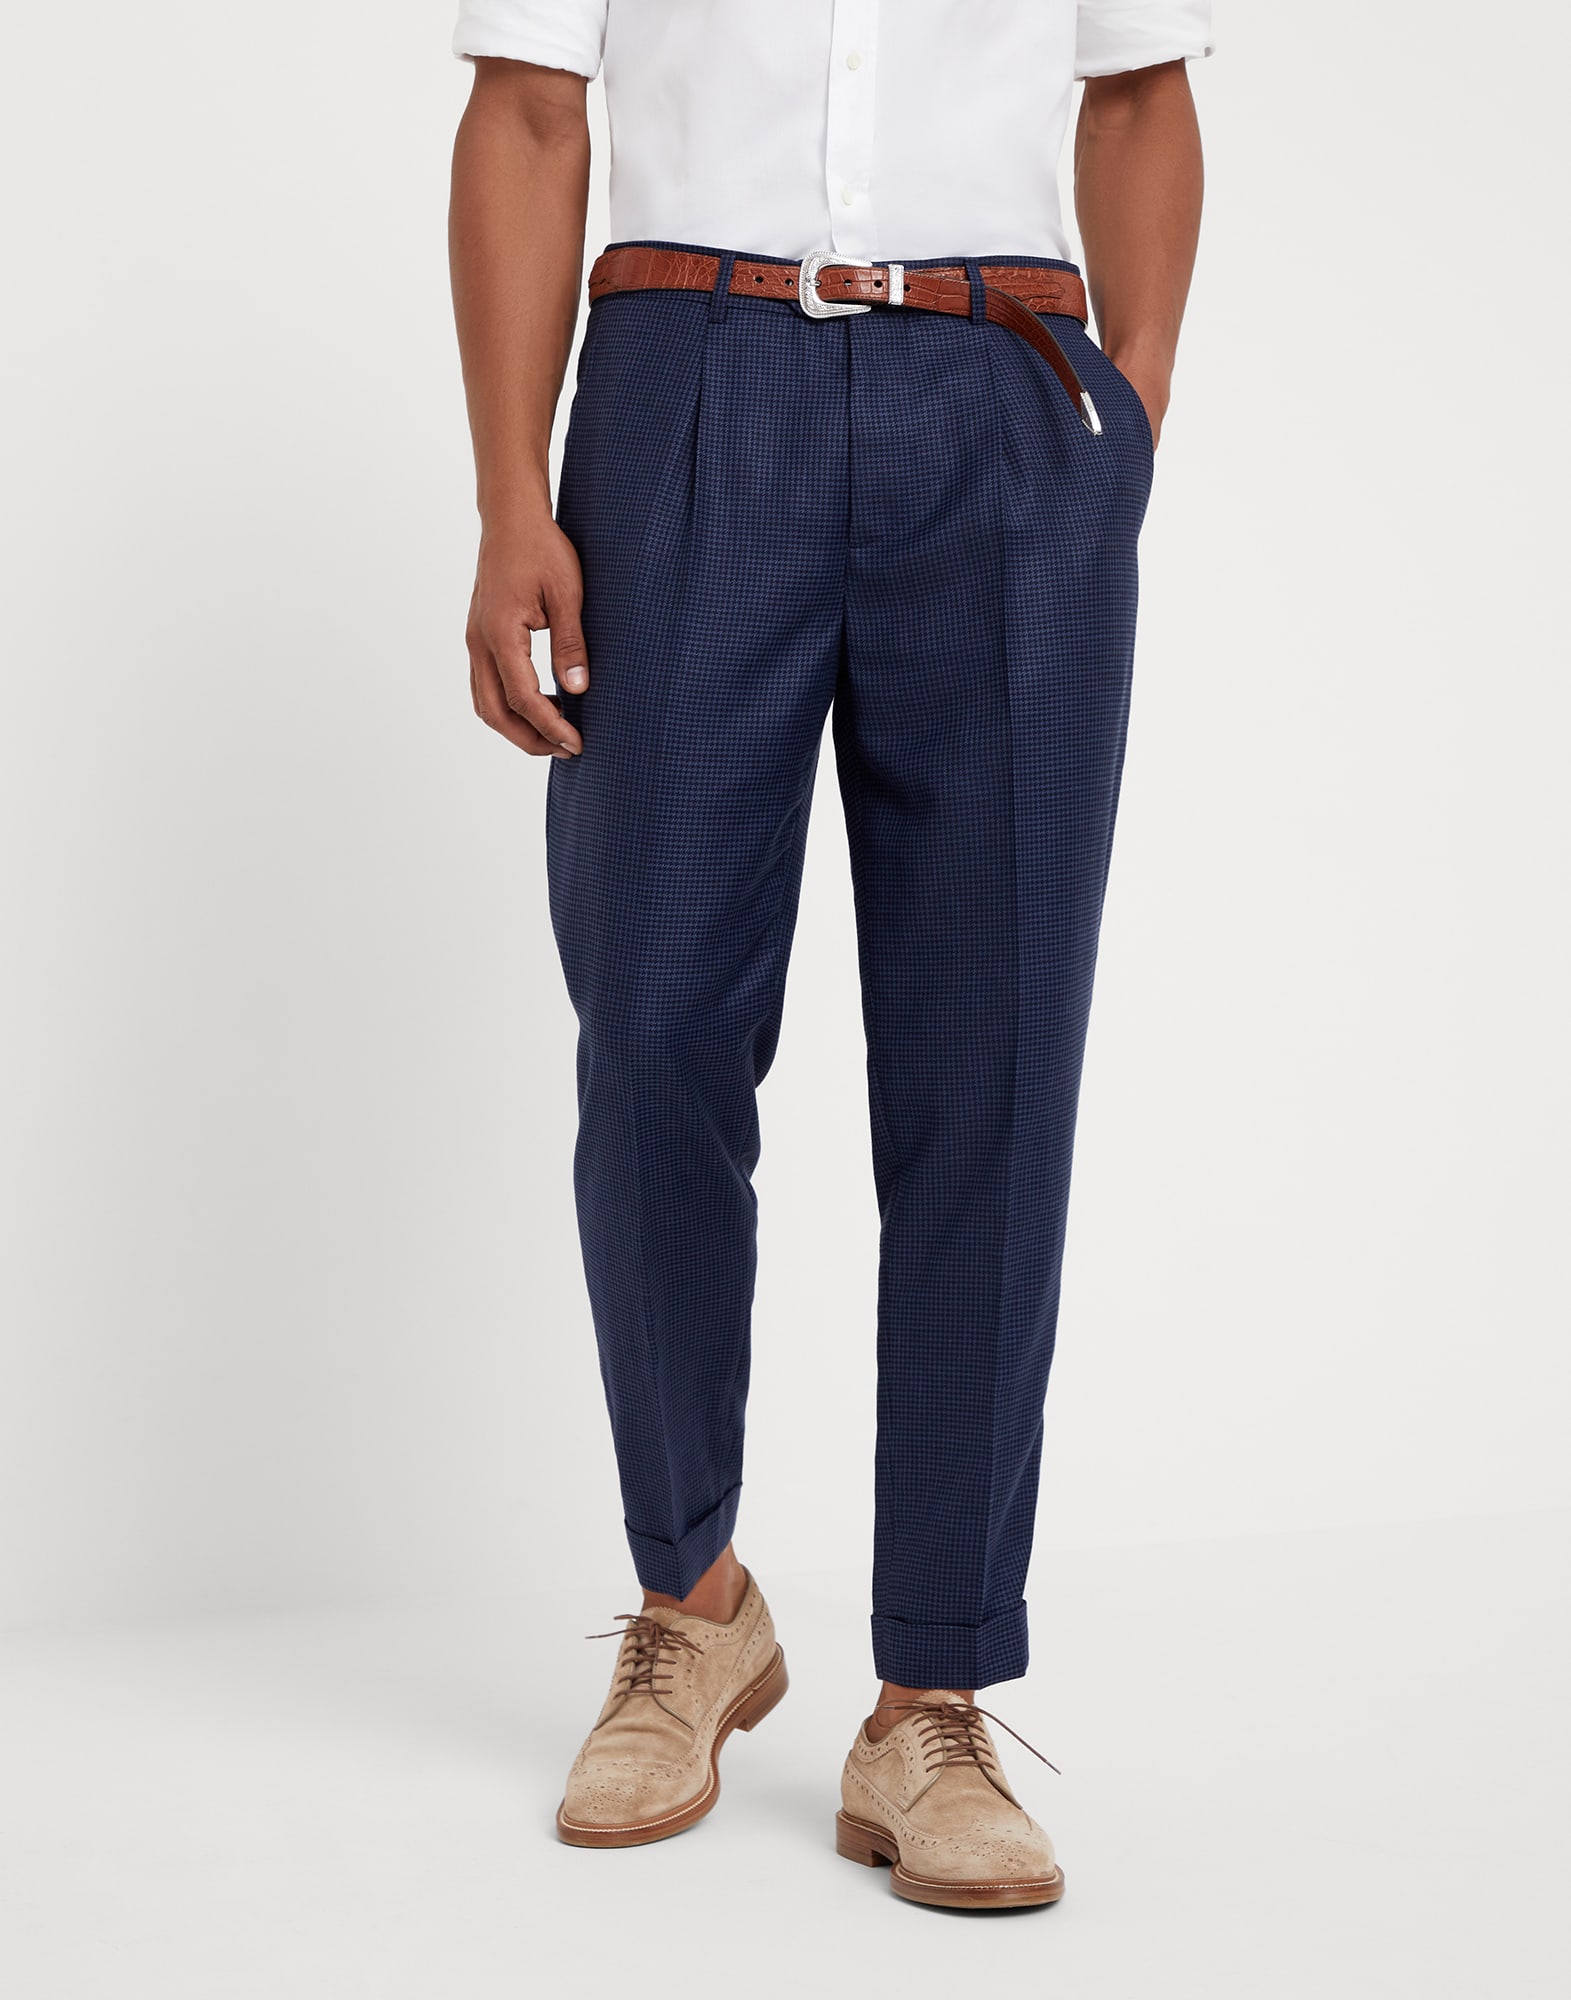 What color shoes should you wear with navy pants? - Quora